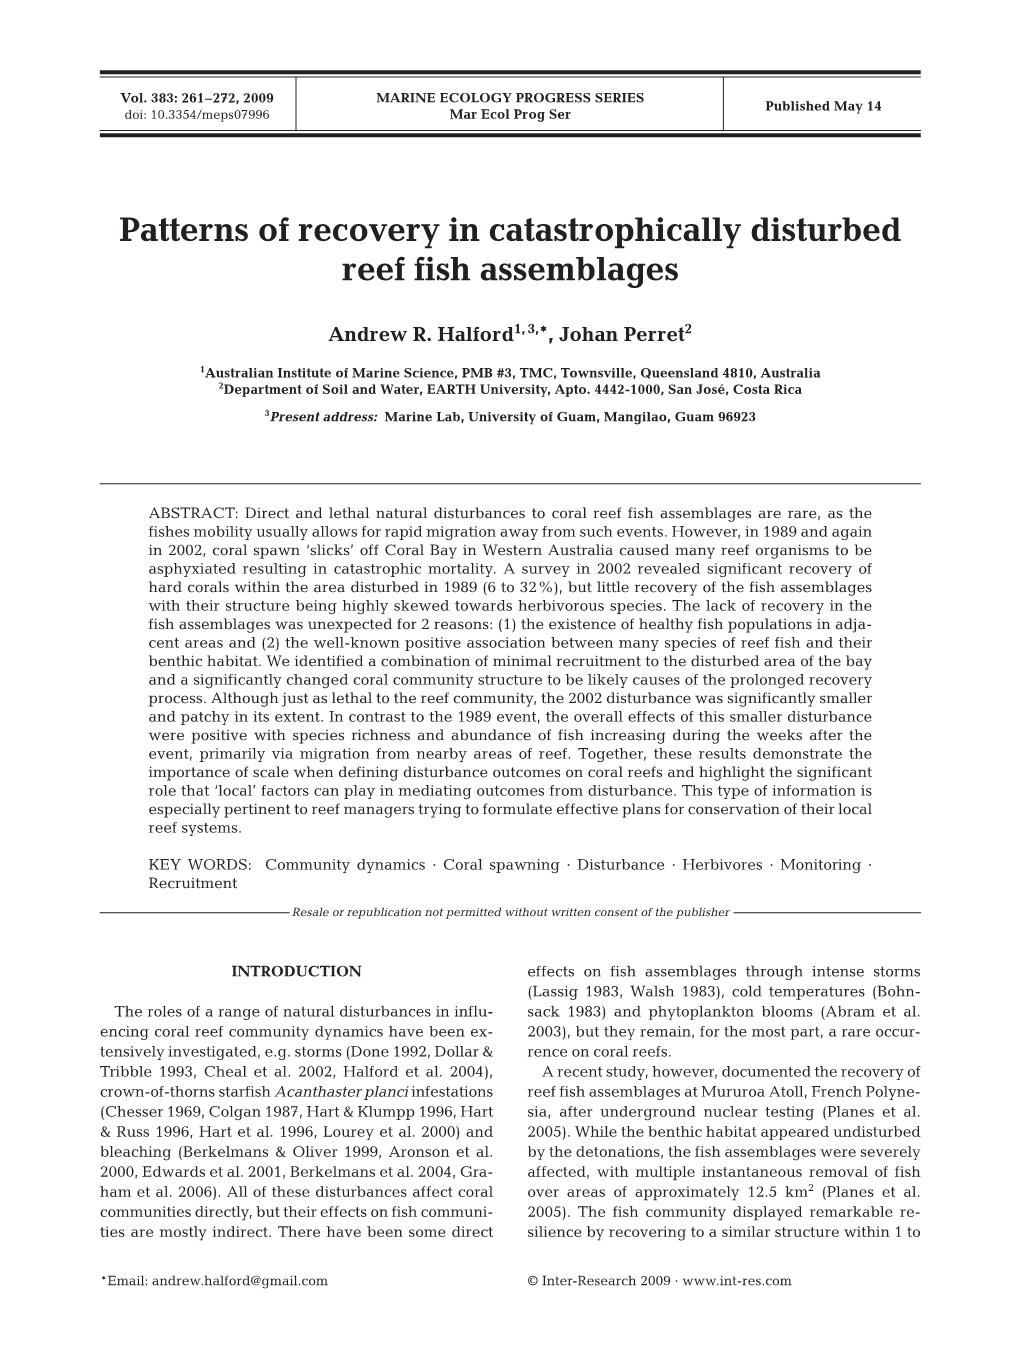 Patterns of Recovery in Catastrophically Disturbed Reef Fish Assemblages